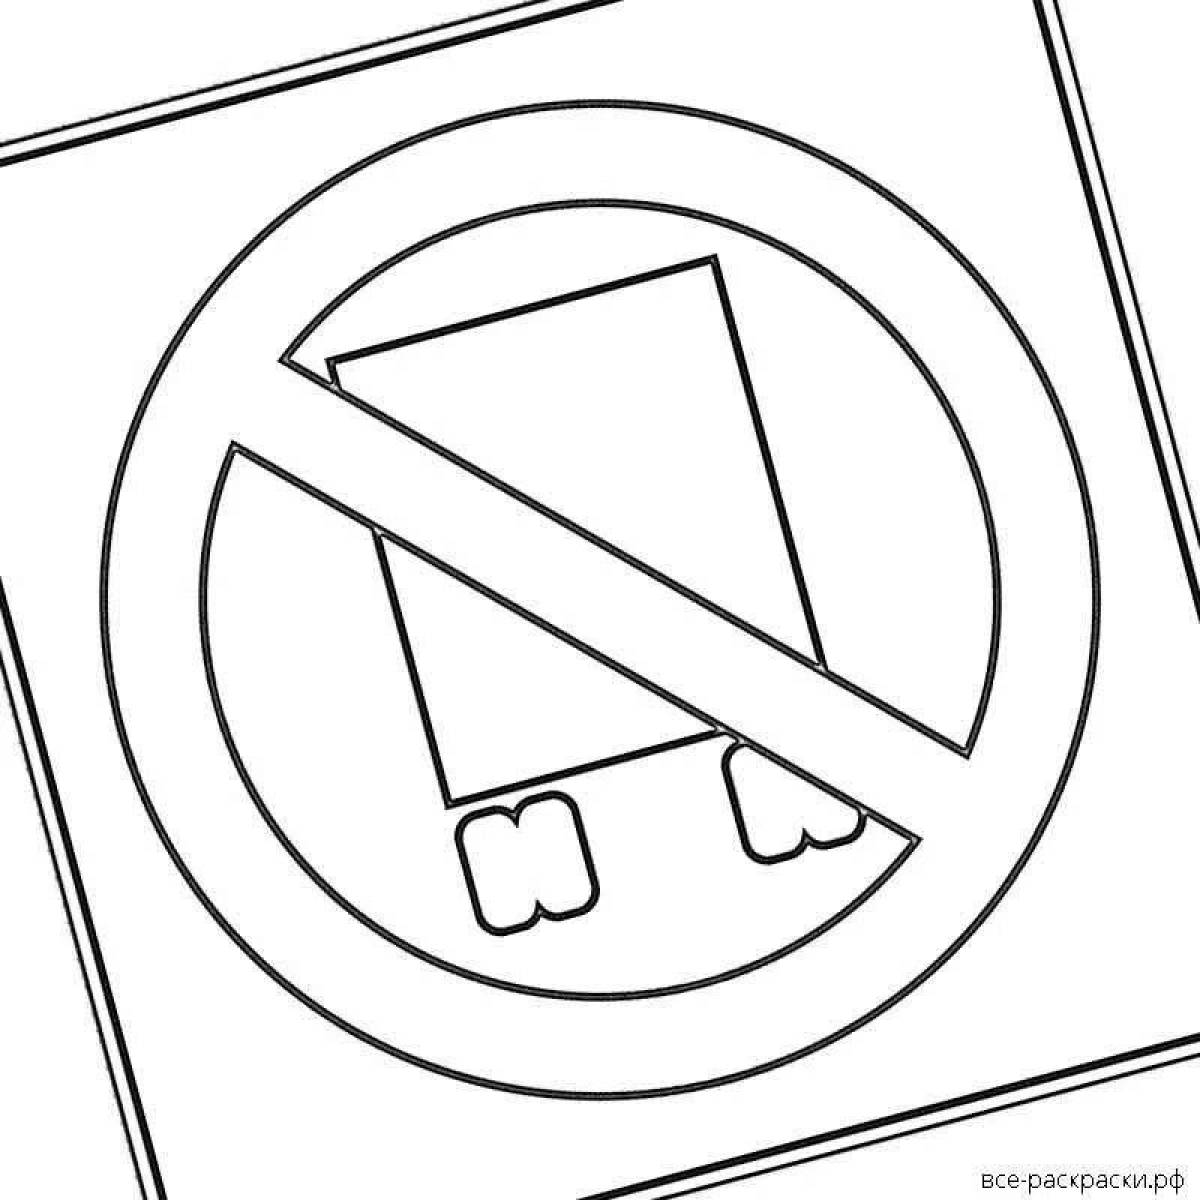 Coloring book forbidding sign